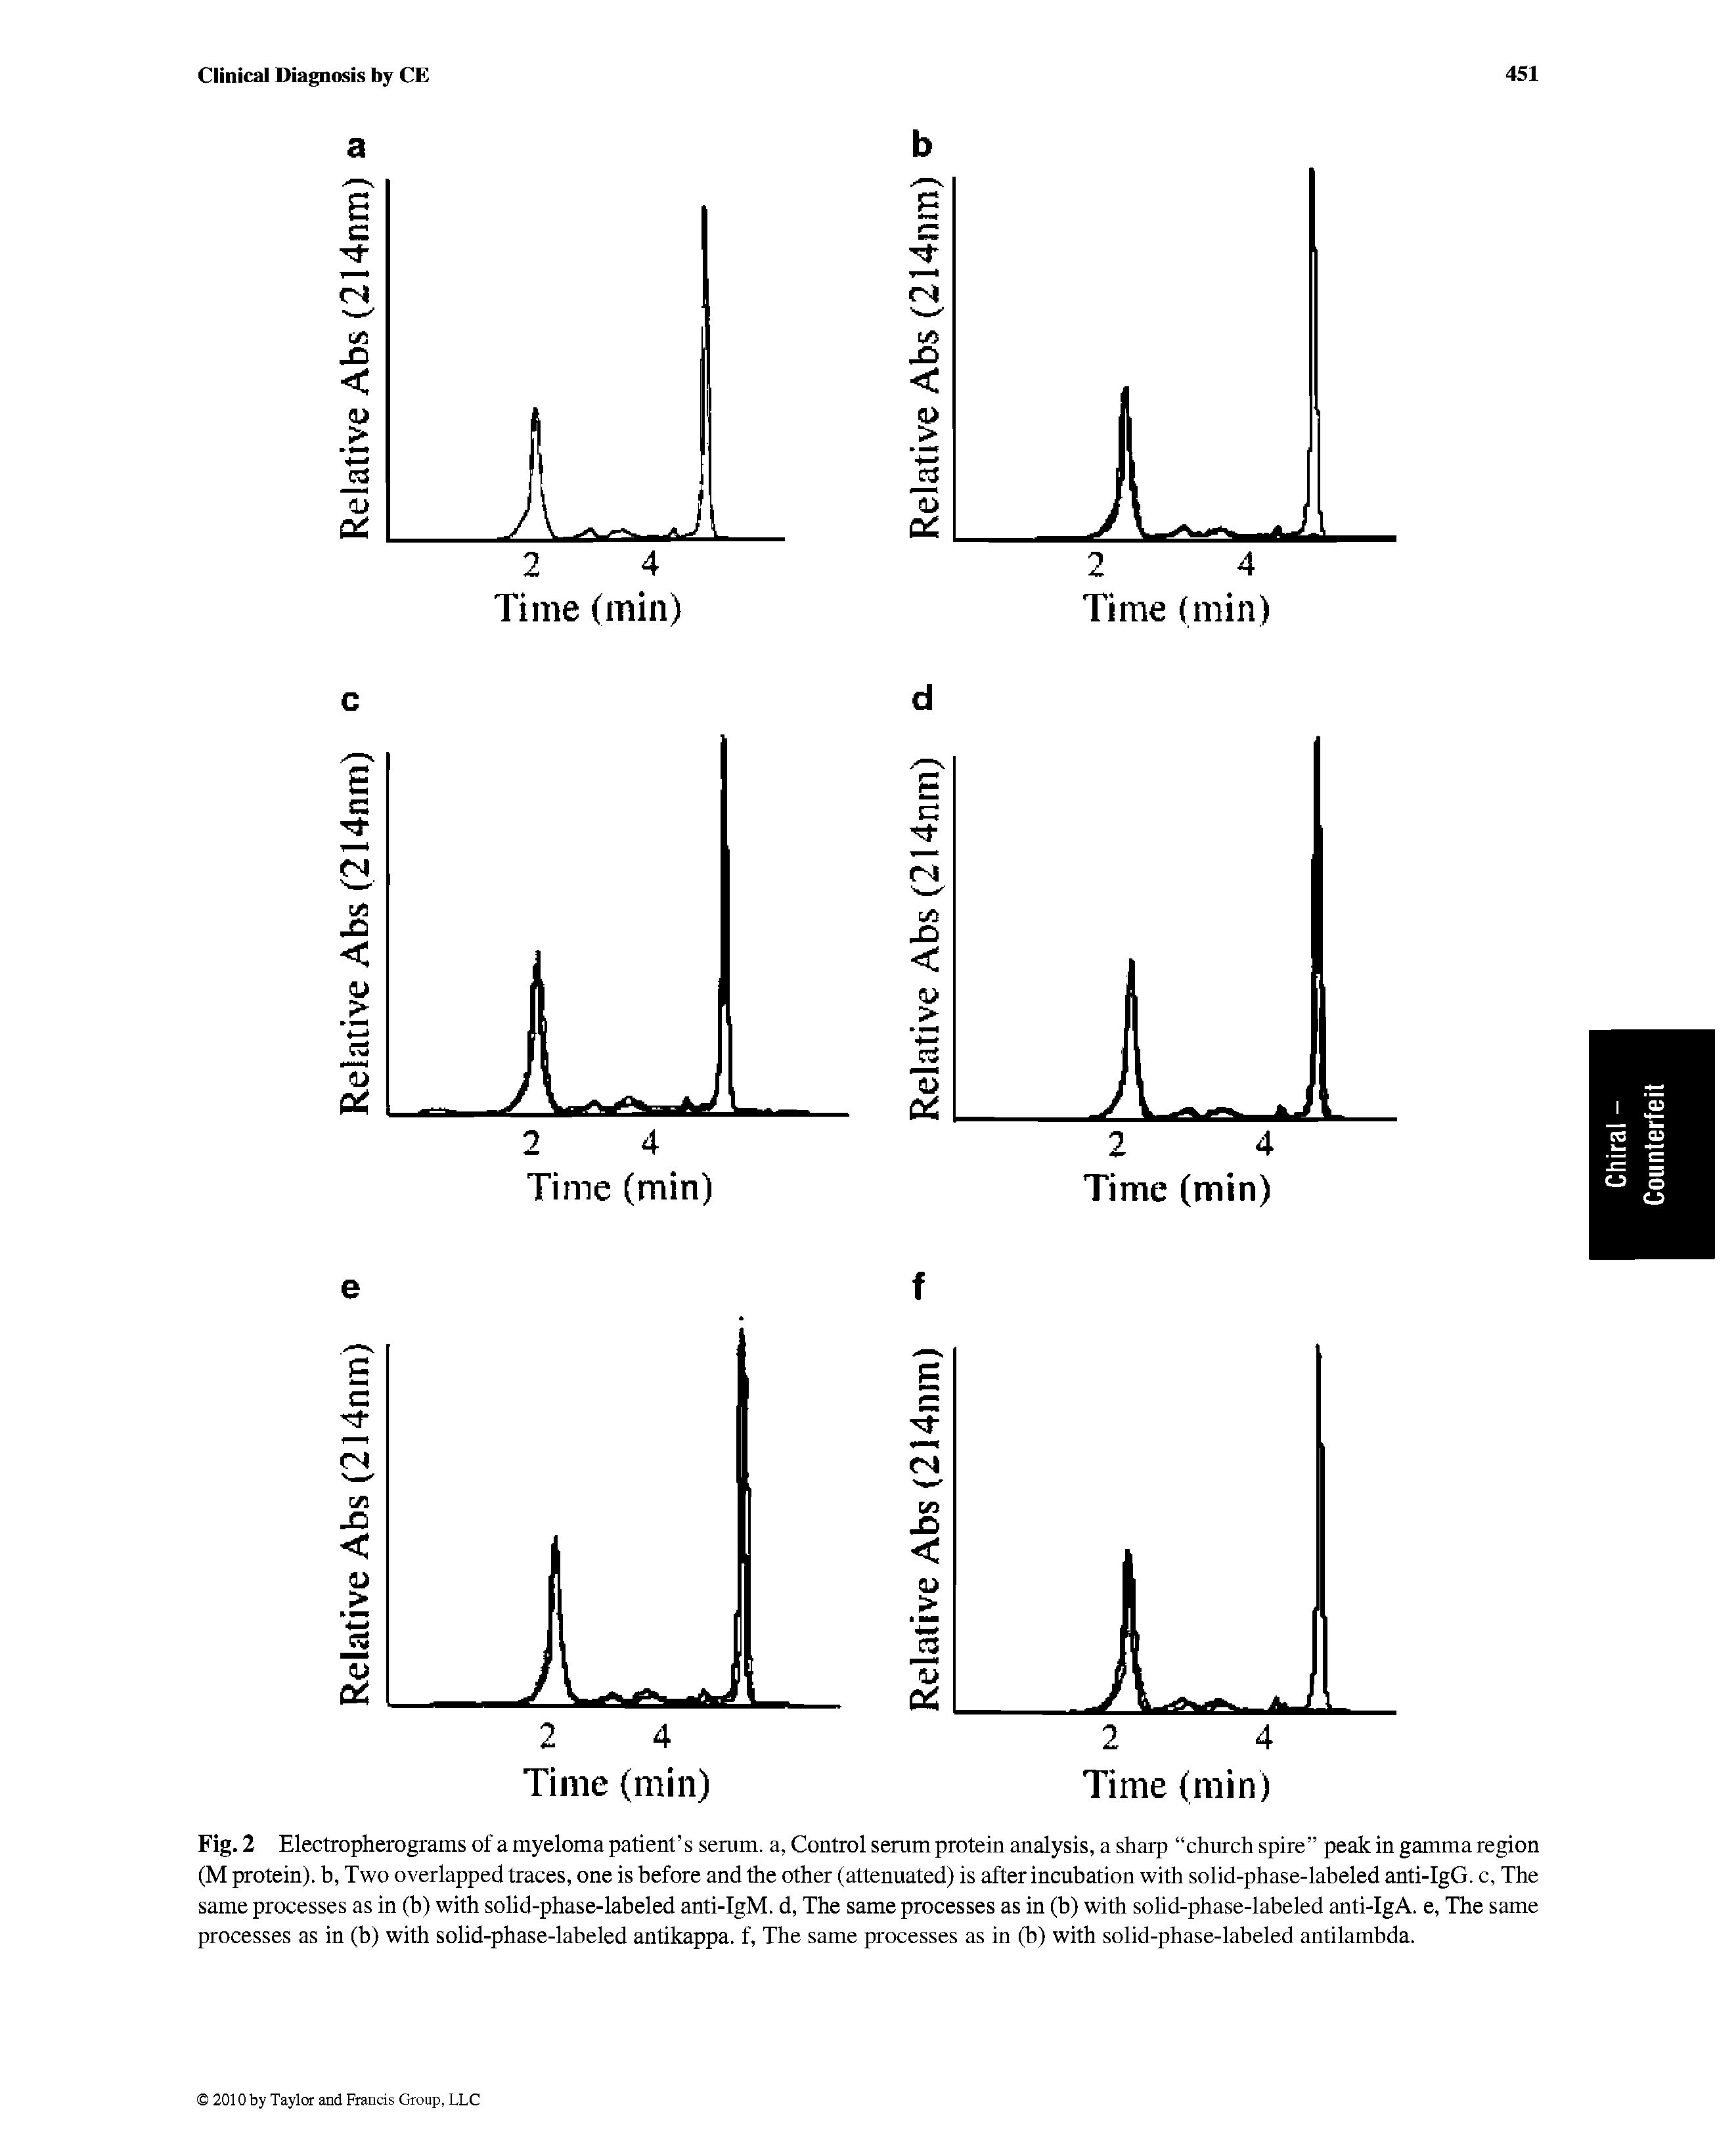 Fig. 2 Electropherograms of a myeloma patient s serum, a, Control serum protein analysis, a sharp church spire peak in gamma region (M protein), b, Two overlapped traces, one is before and the other (attenuated) is after incubation with solid-phase-labeled anti-IgG. c. The same processes as in (b) with solid-phase-labeled anti-IgM. d. The same processes as in (b) with solid-phase-labeled anti-IgA. e. The same processes as in (b) with solid-phase-labeled antikappa, f. The same processes as in (b) with solid-phase-labeled antilambda.